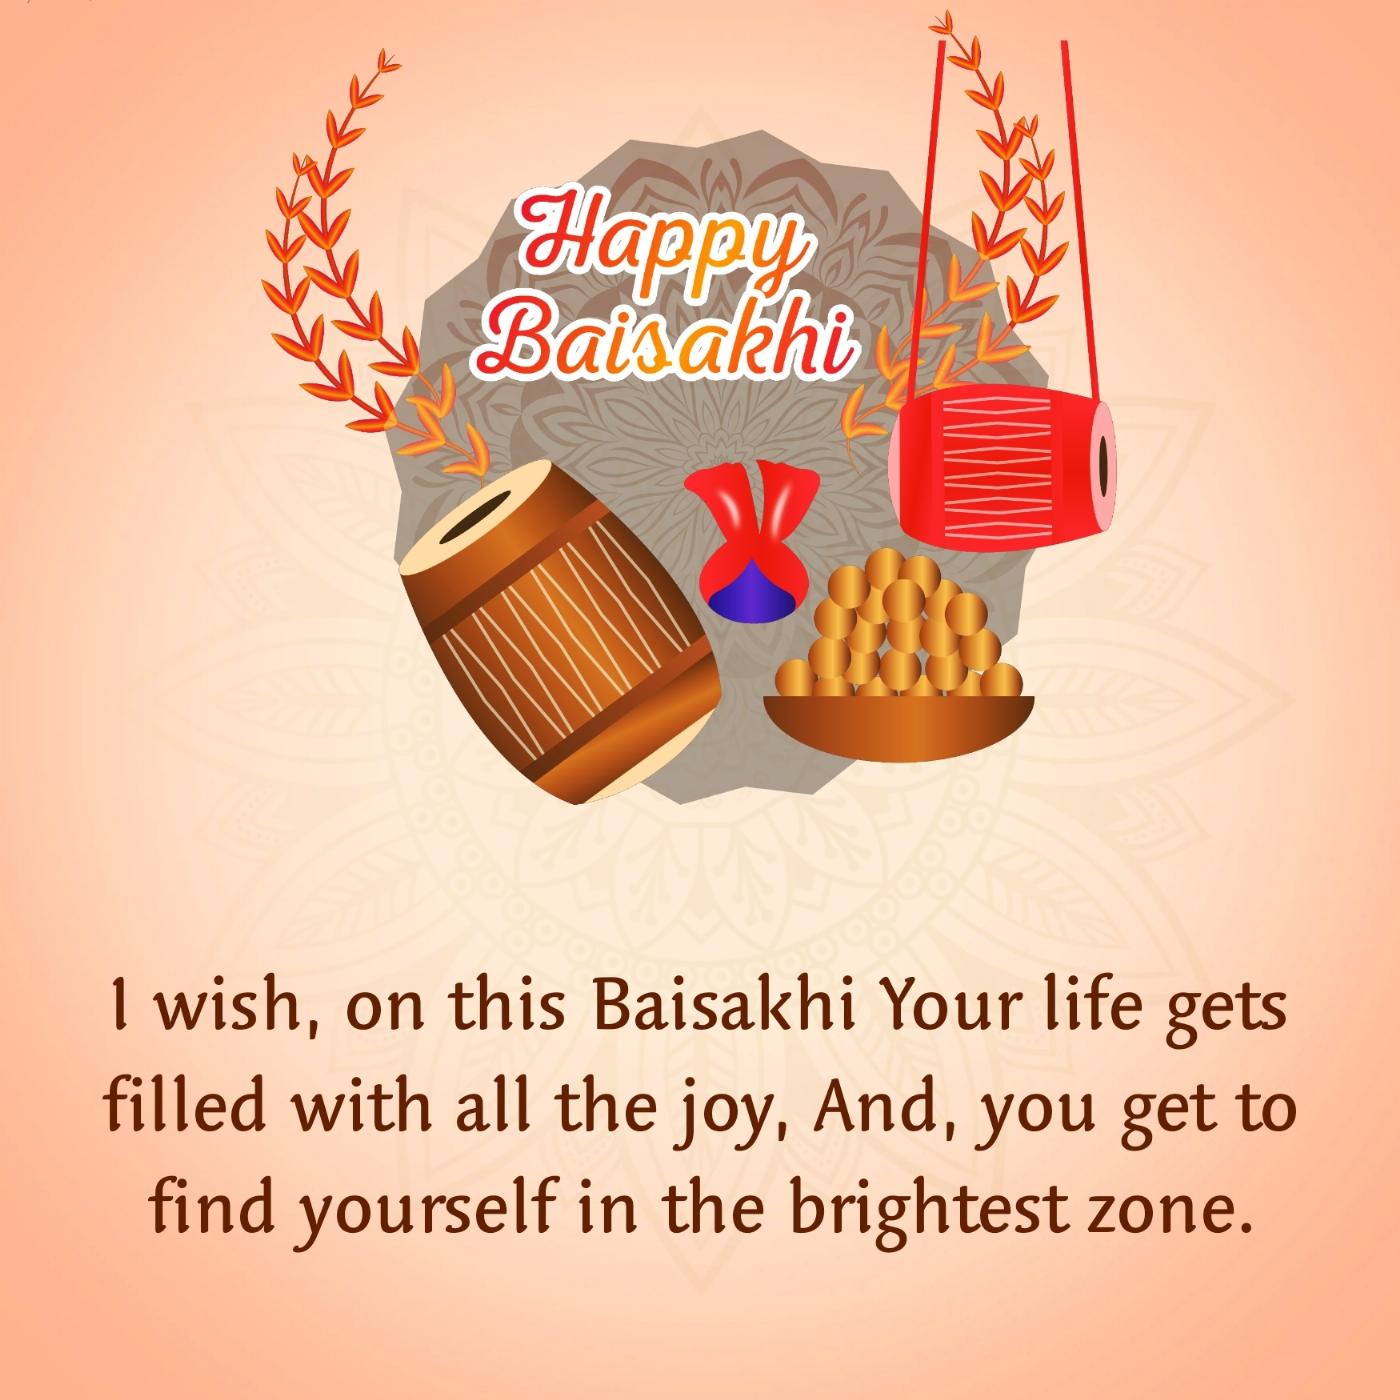 I wish on this Baisakhi Your life gets filled with all the joy